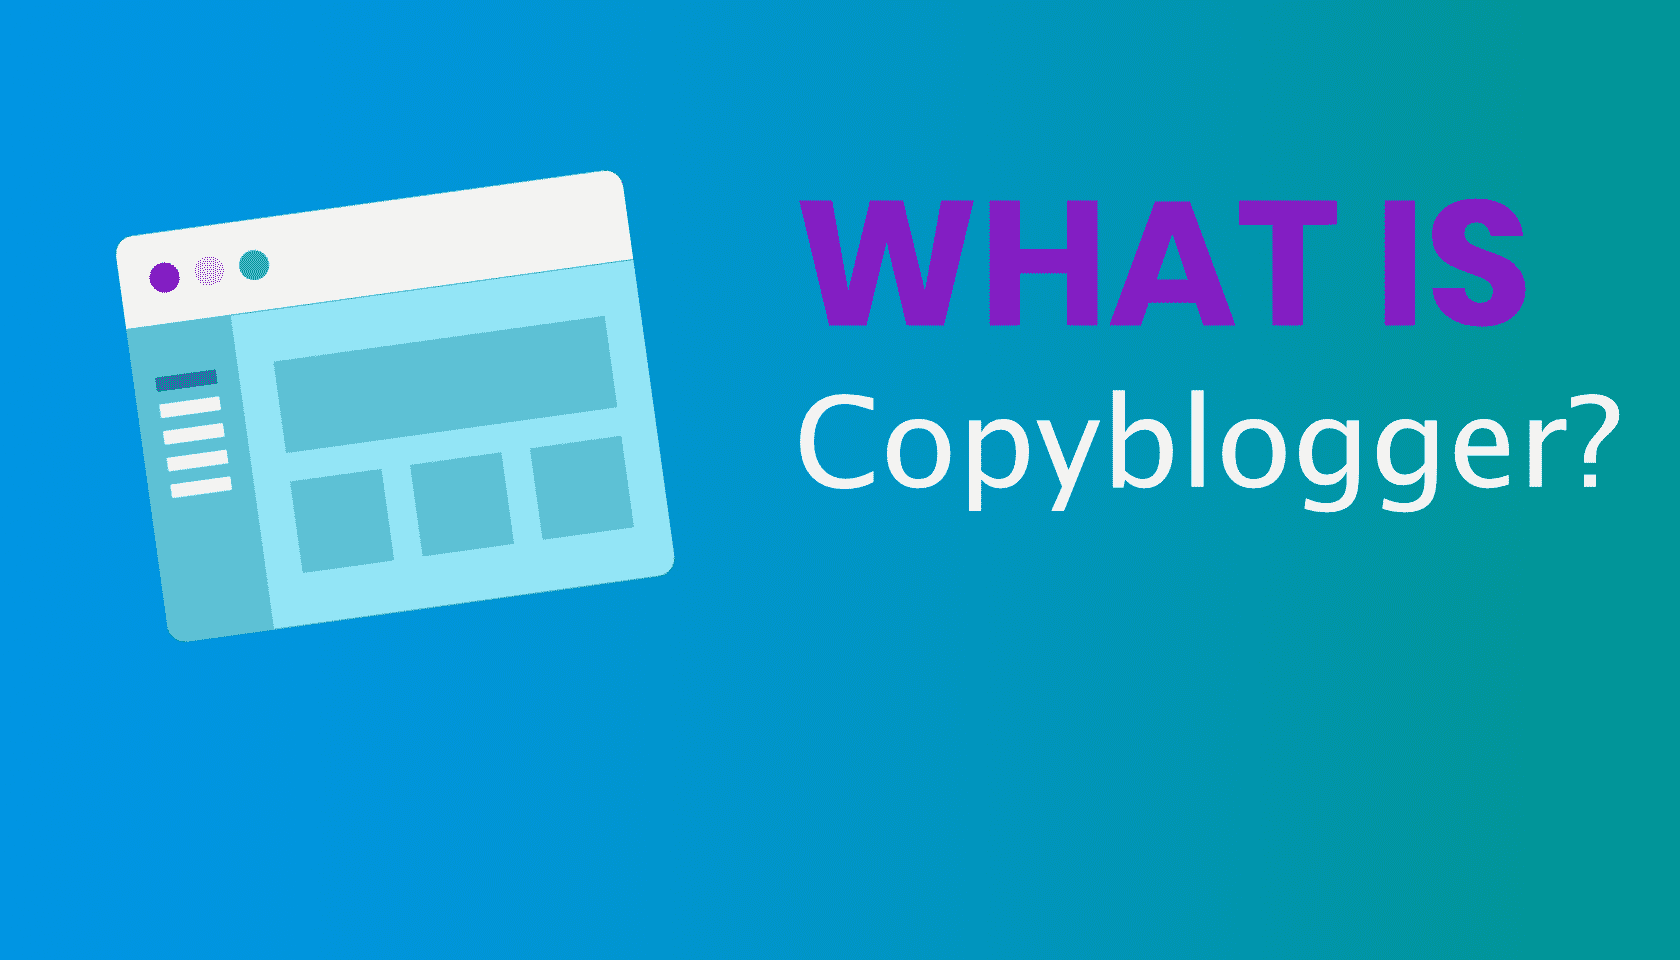 What is: Copyblogger